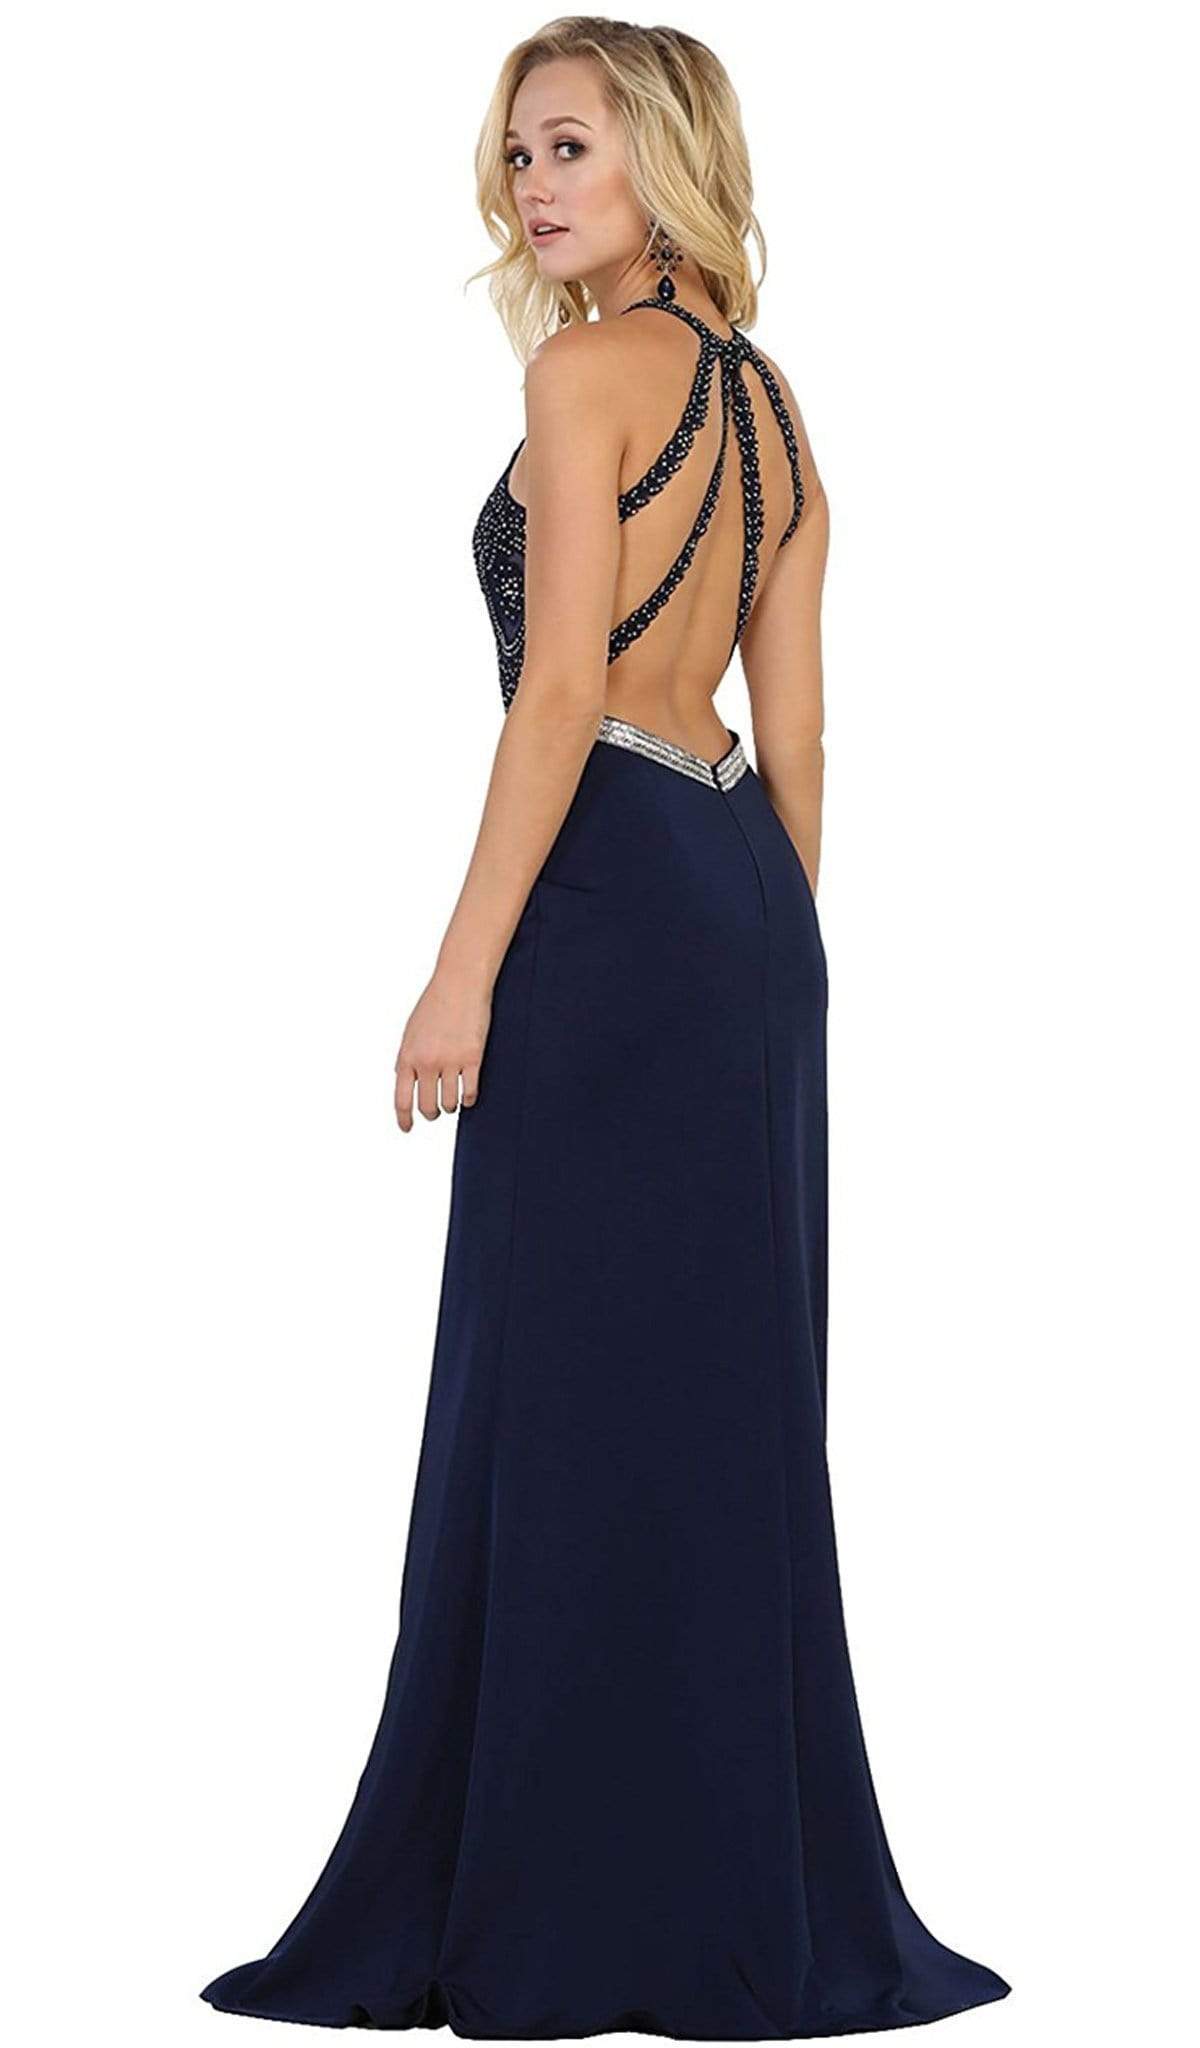 May Queen - Strappy Illusion Prom Dress with Slit Special Occasion Dress